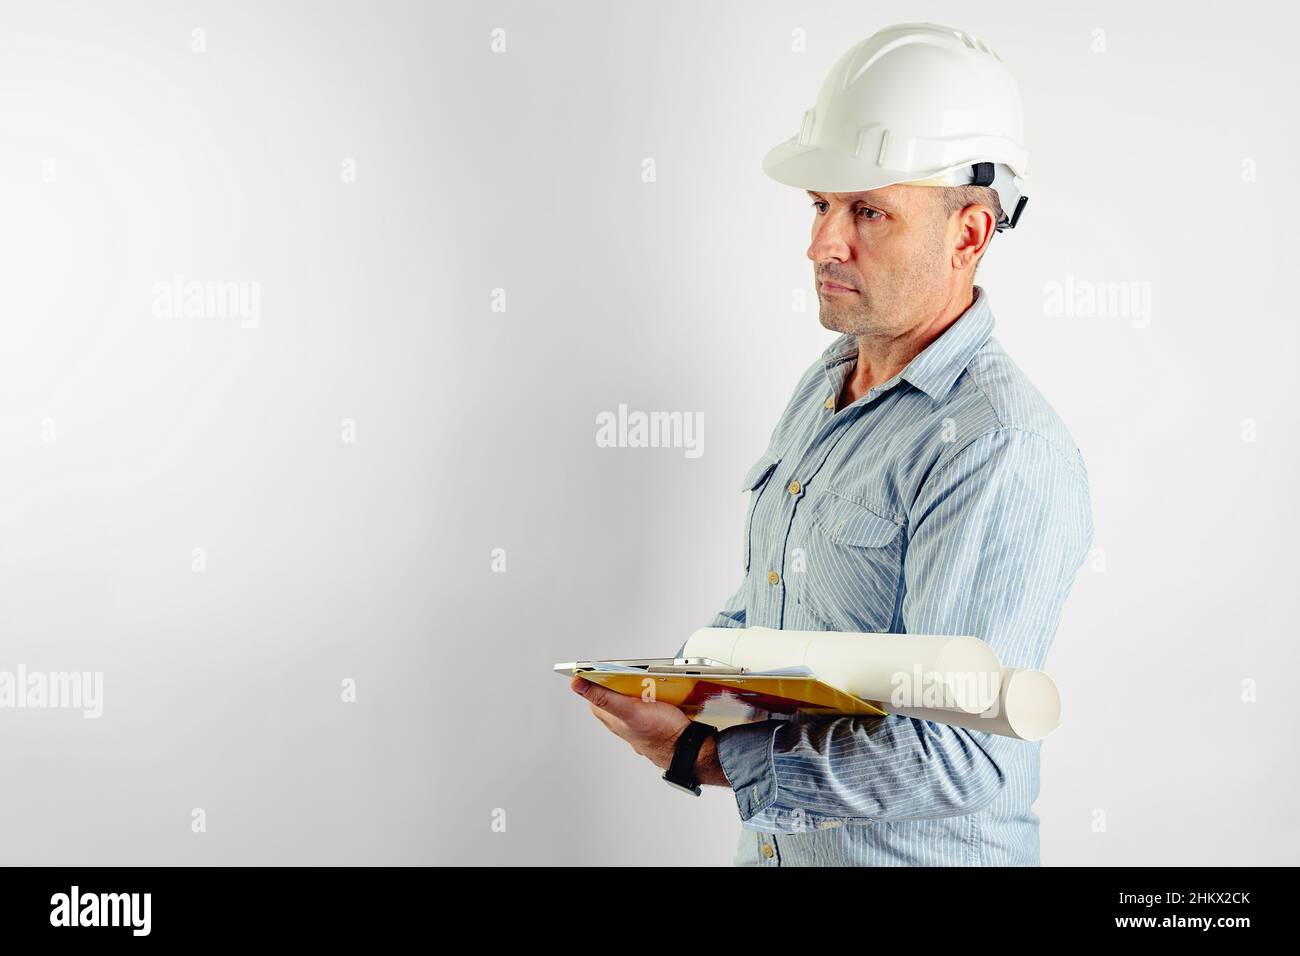 A middle-aged male foreman in a light-colored shirt and a white hard helmet. Isolated portrait on a white background. Copy space. Male stock photo Stock Photo